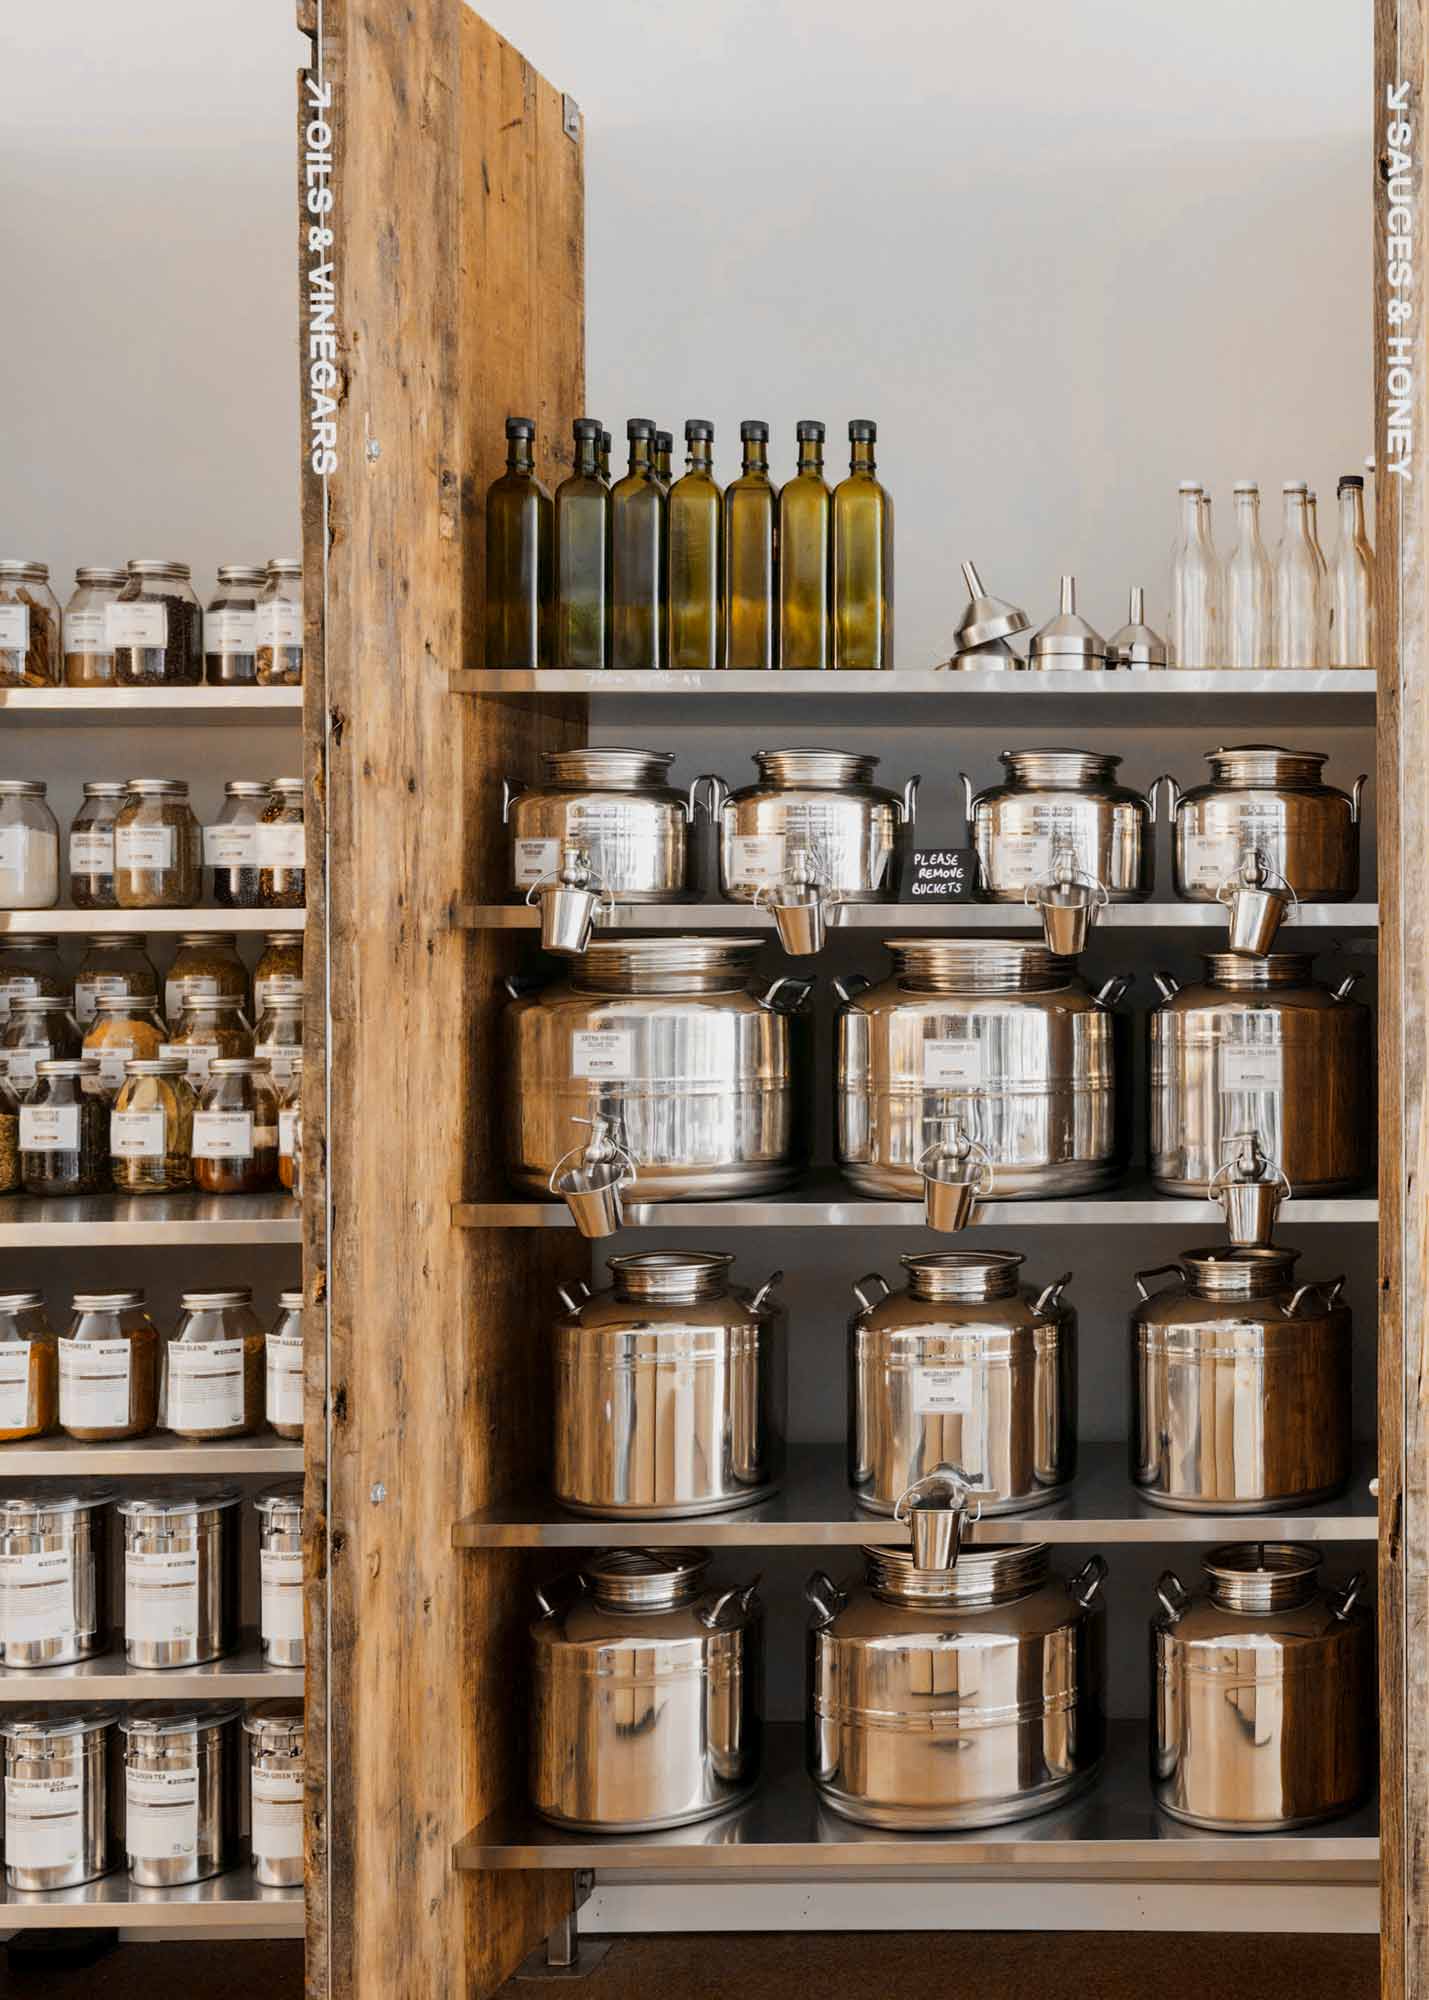 Zero Waste pantry! Bulk shopping with your own containers and jars